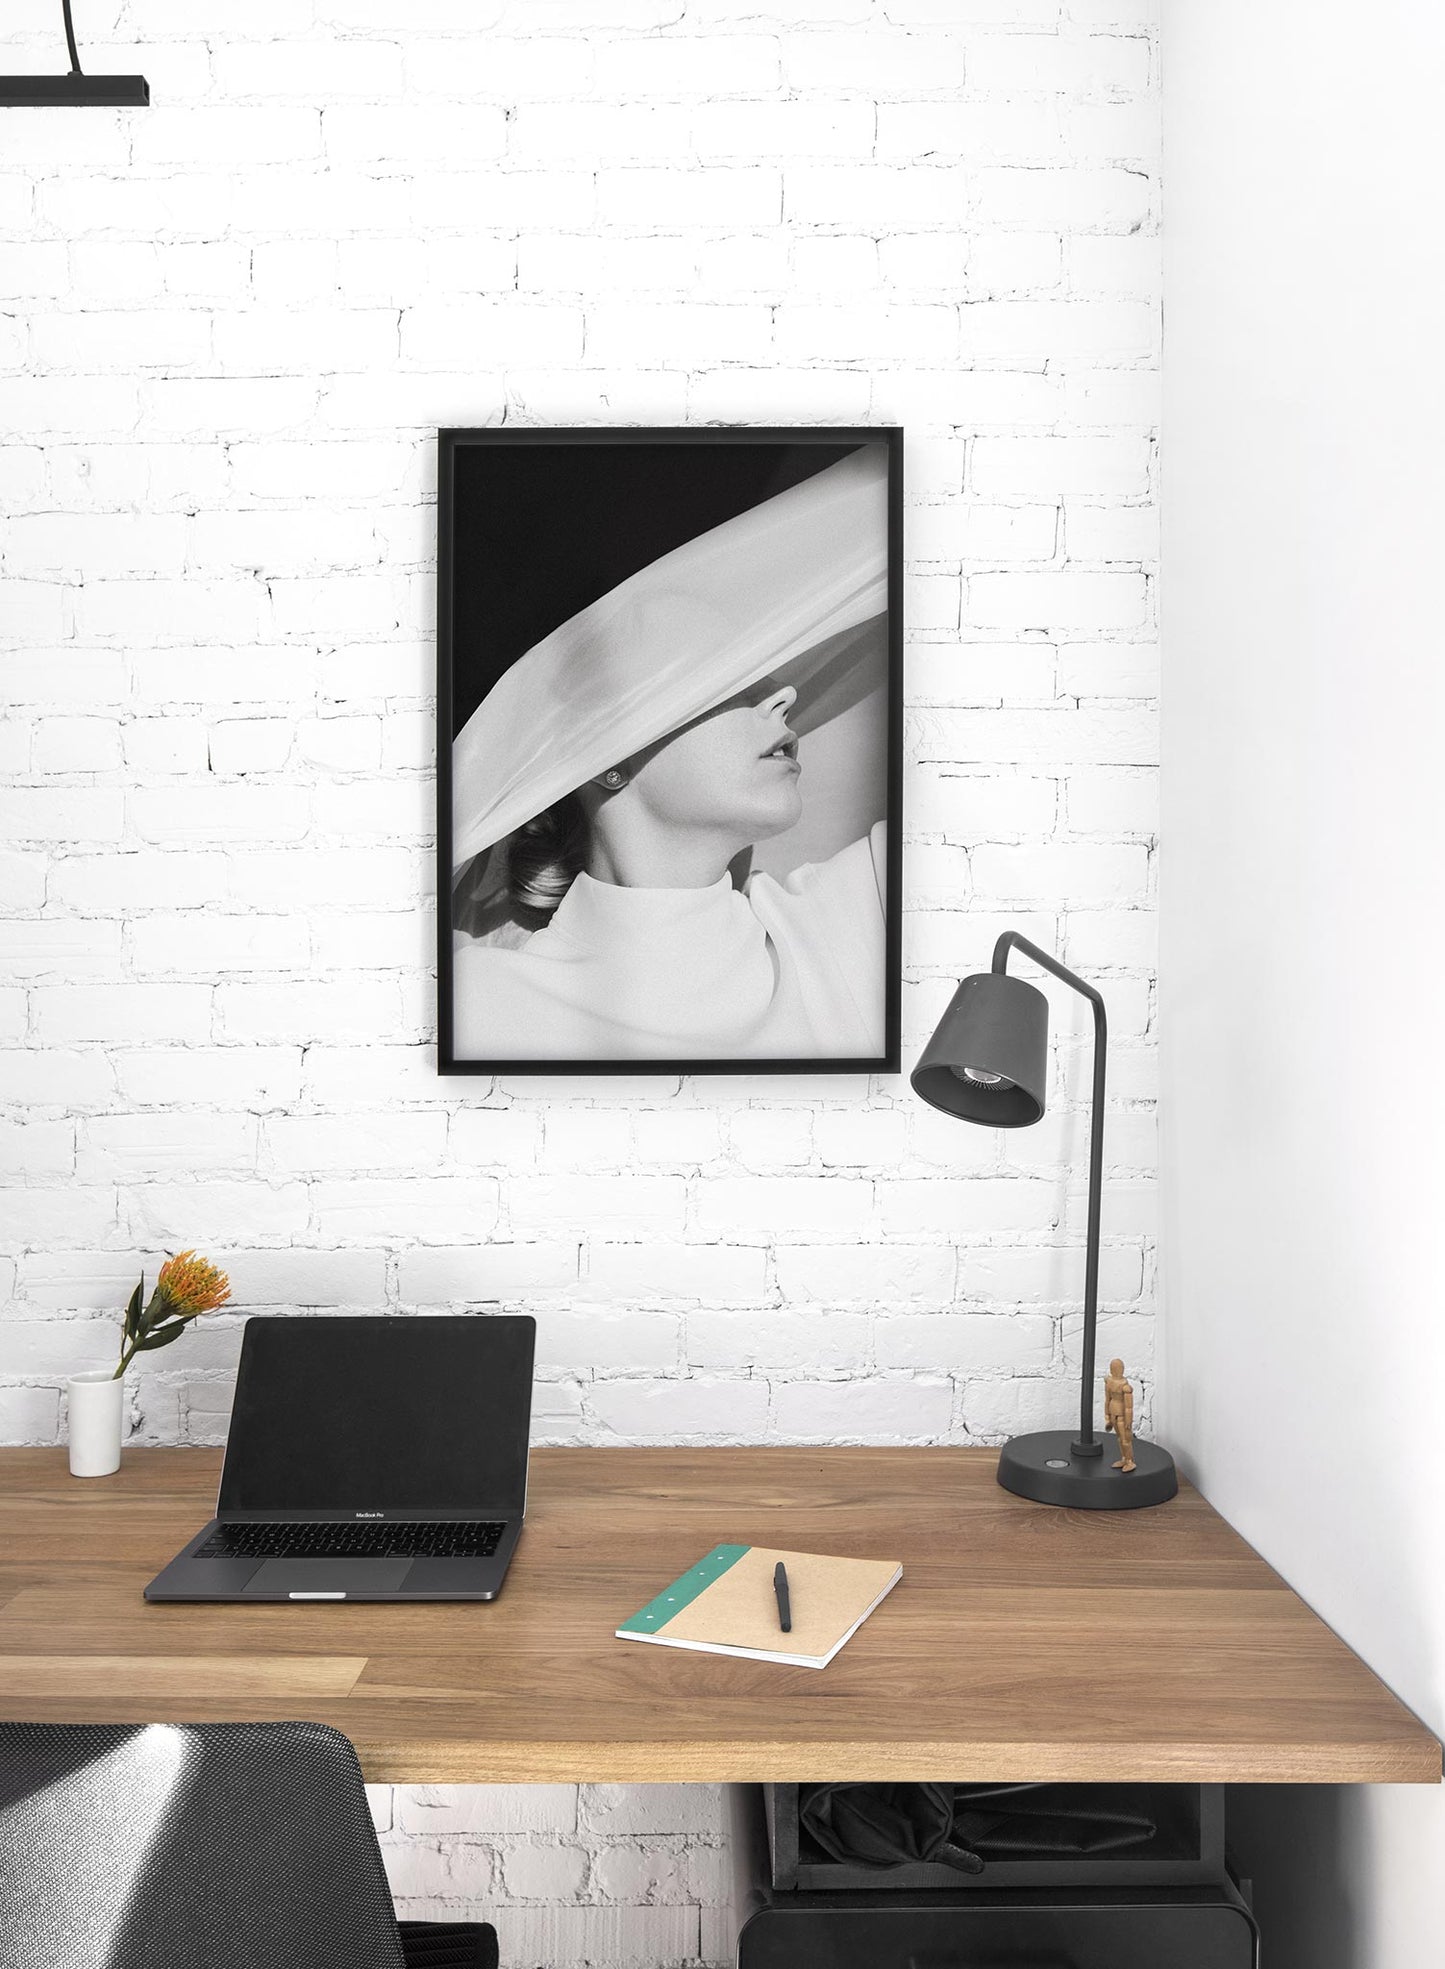 Black and white fashion photography poster by Opposite Wall with woman in the shadows - Lifestyle - Office Desk